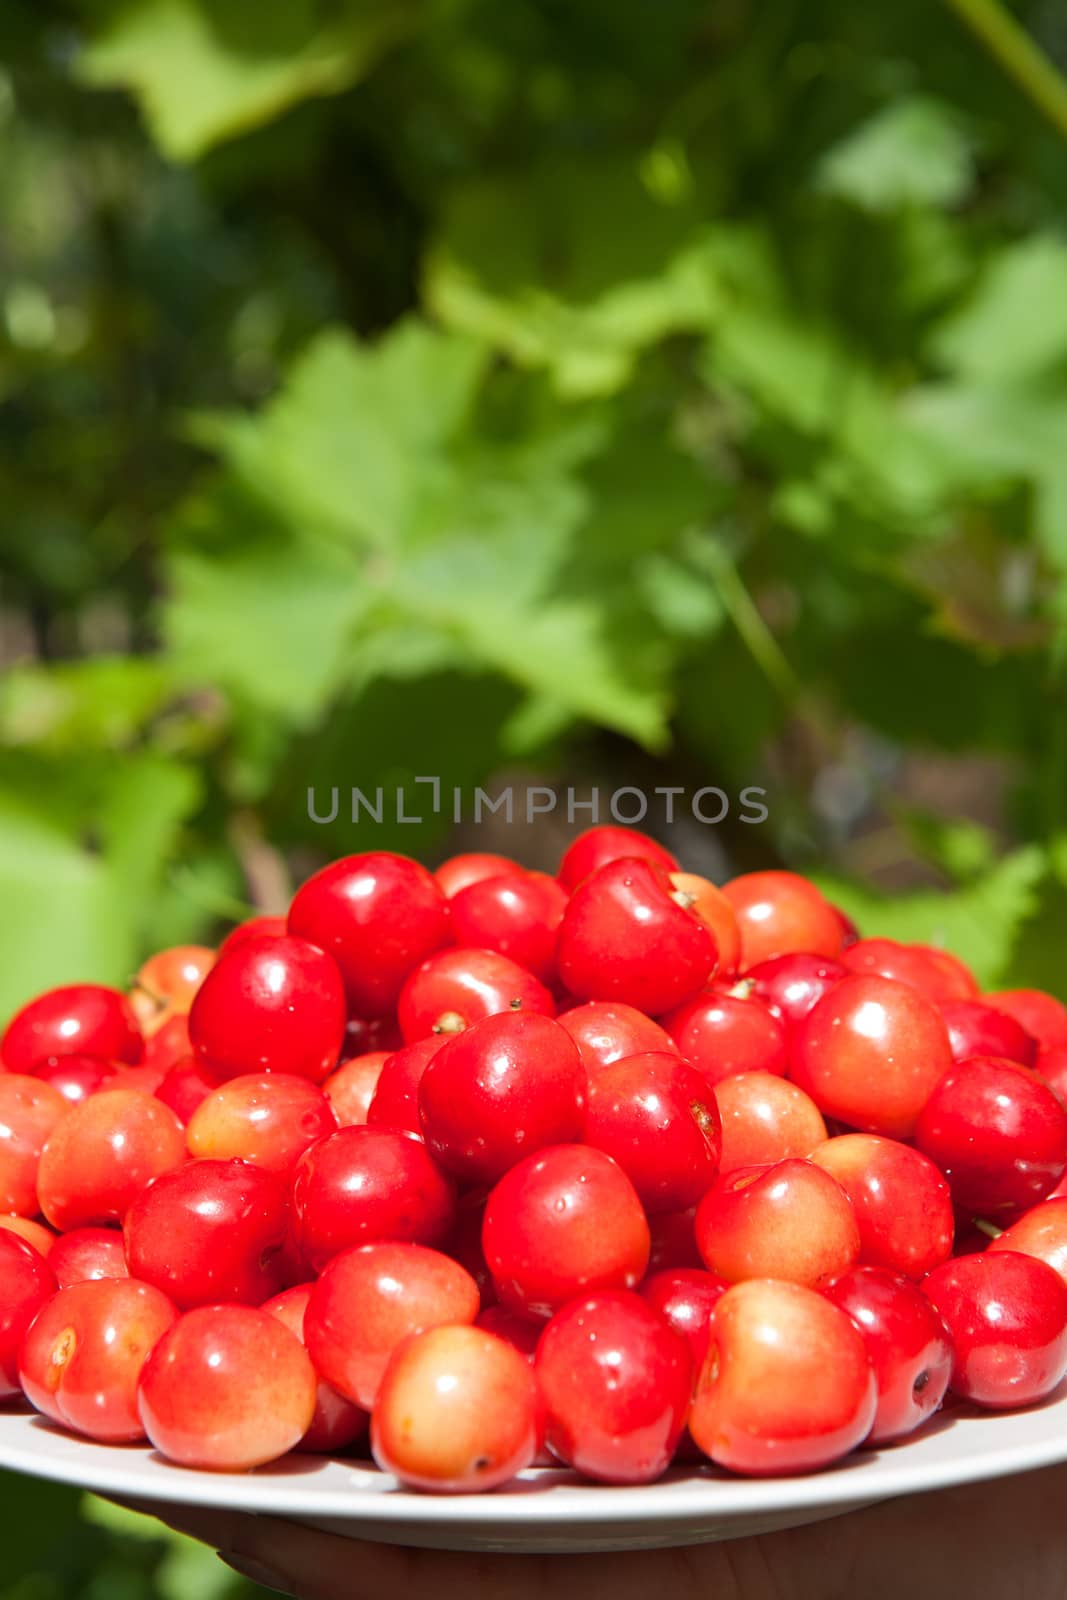 cherries in the plate by vsurkov